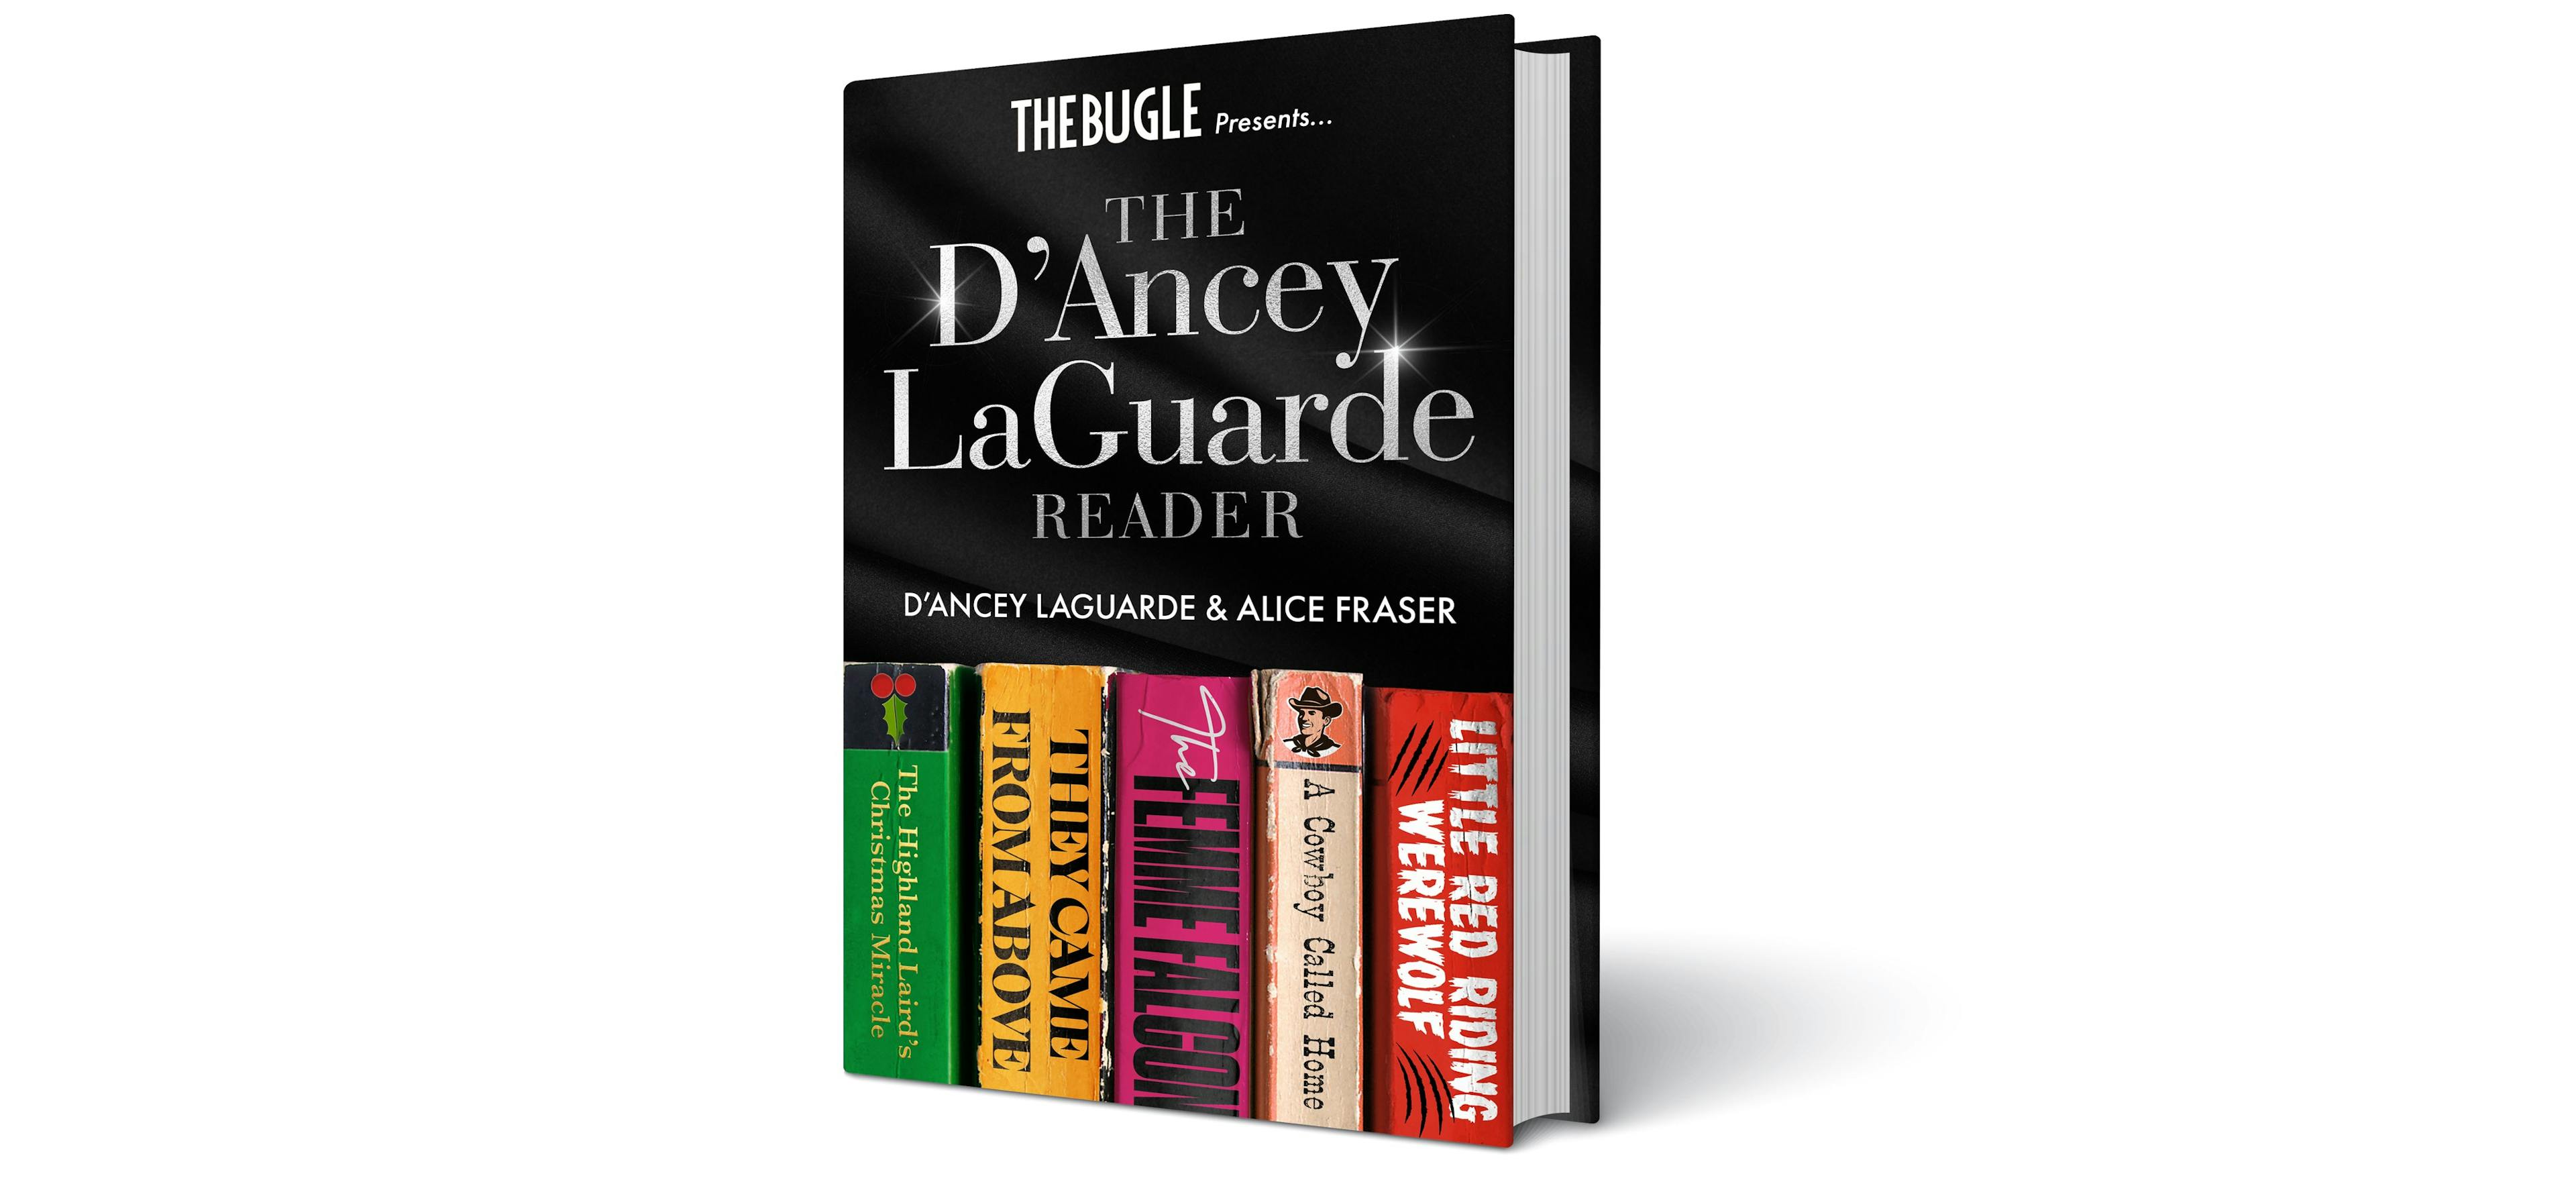 The D'Ancey LaGuarde Reader